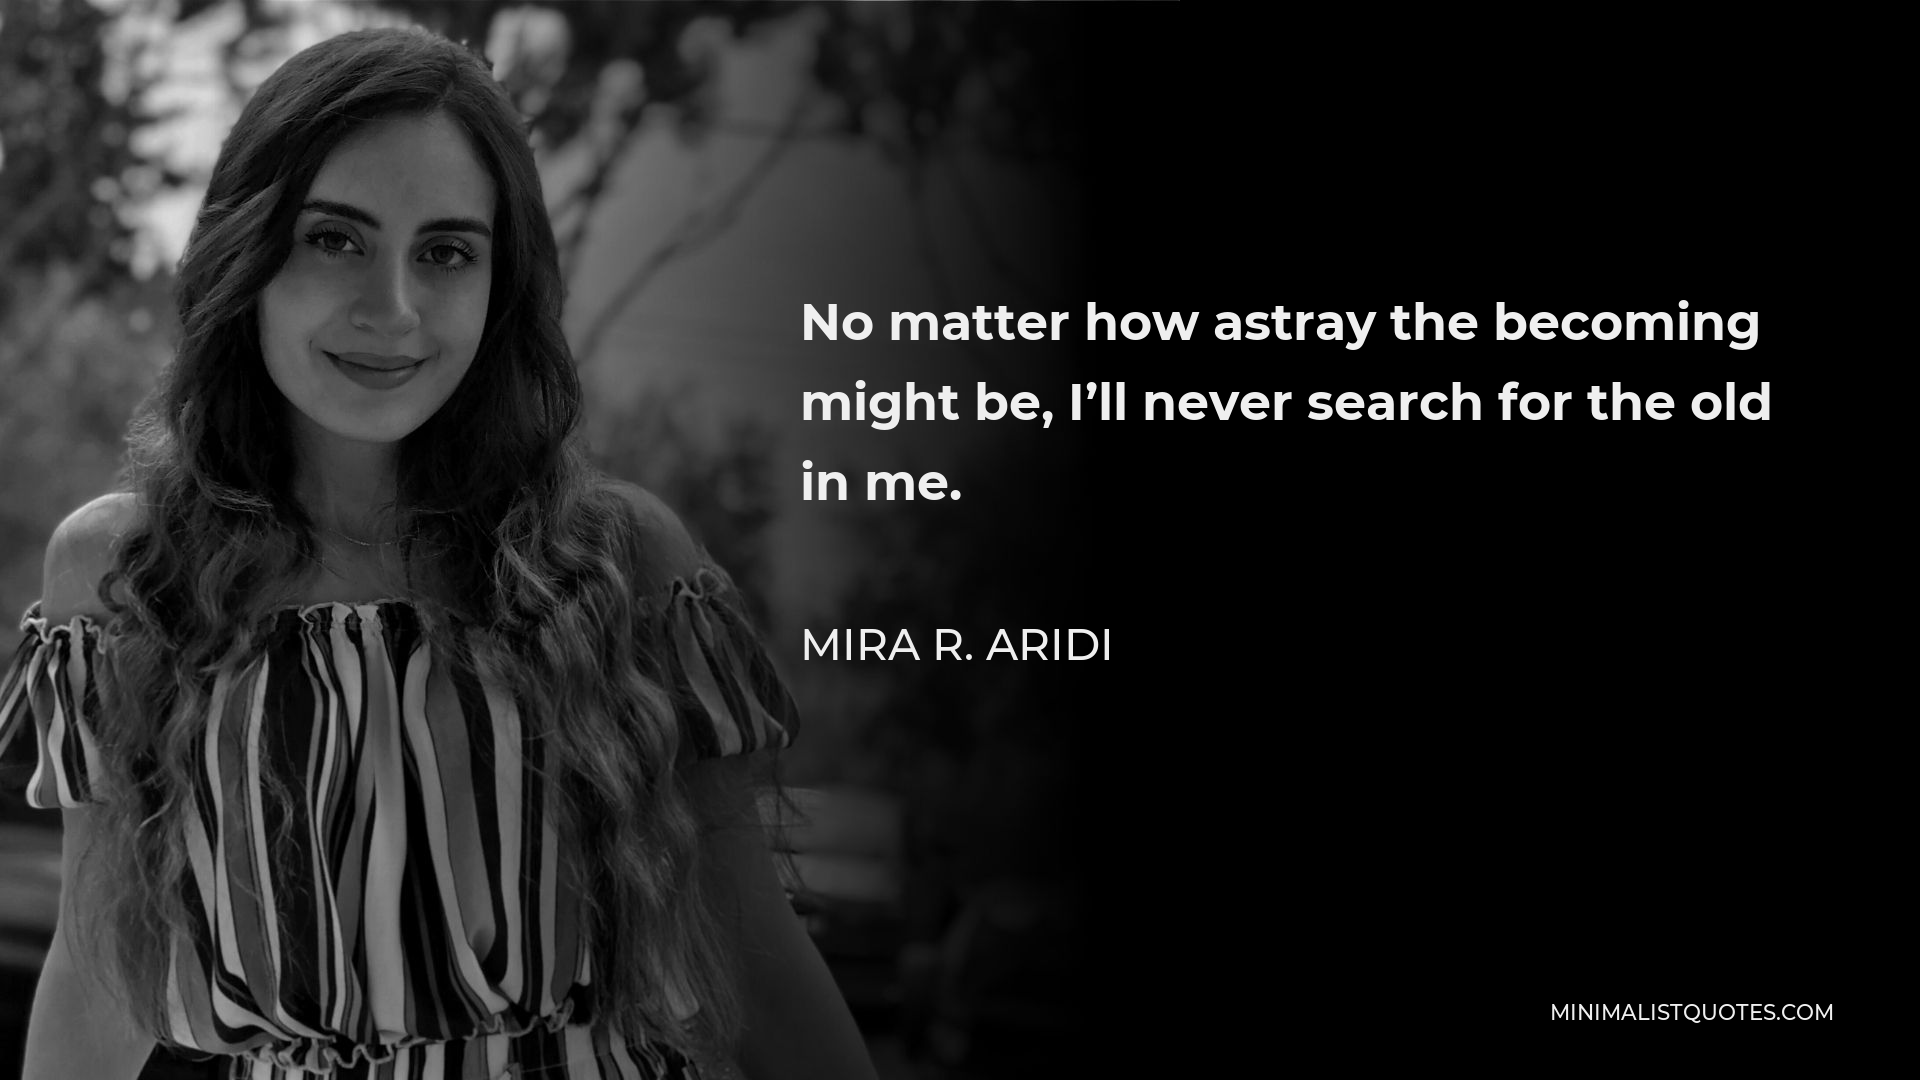 Mira R. Aridi Quote - No matter how astray the becoming might be, I’ll never search for the old in me.